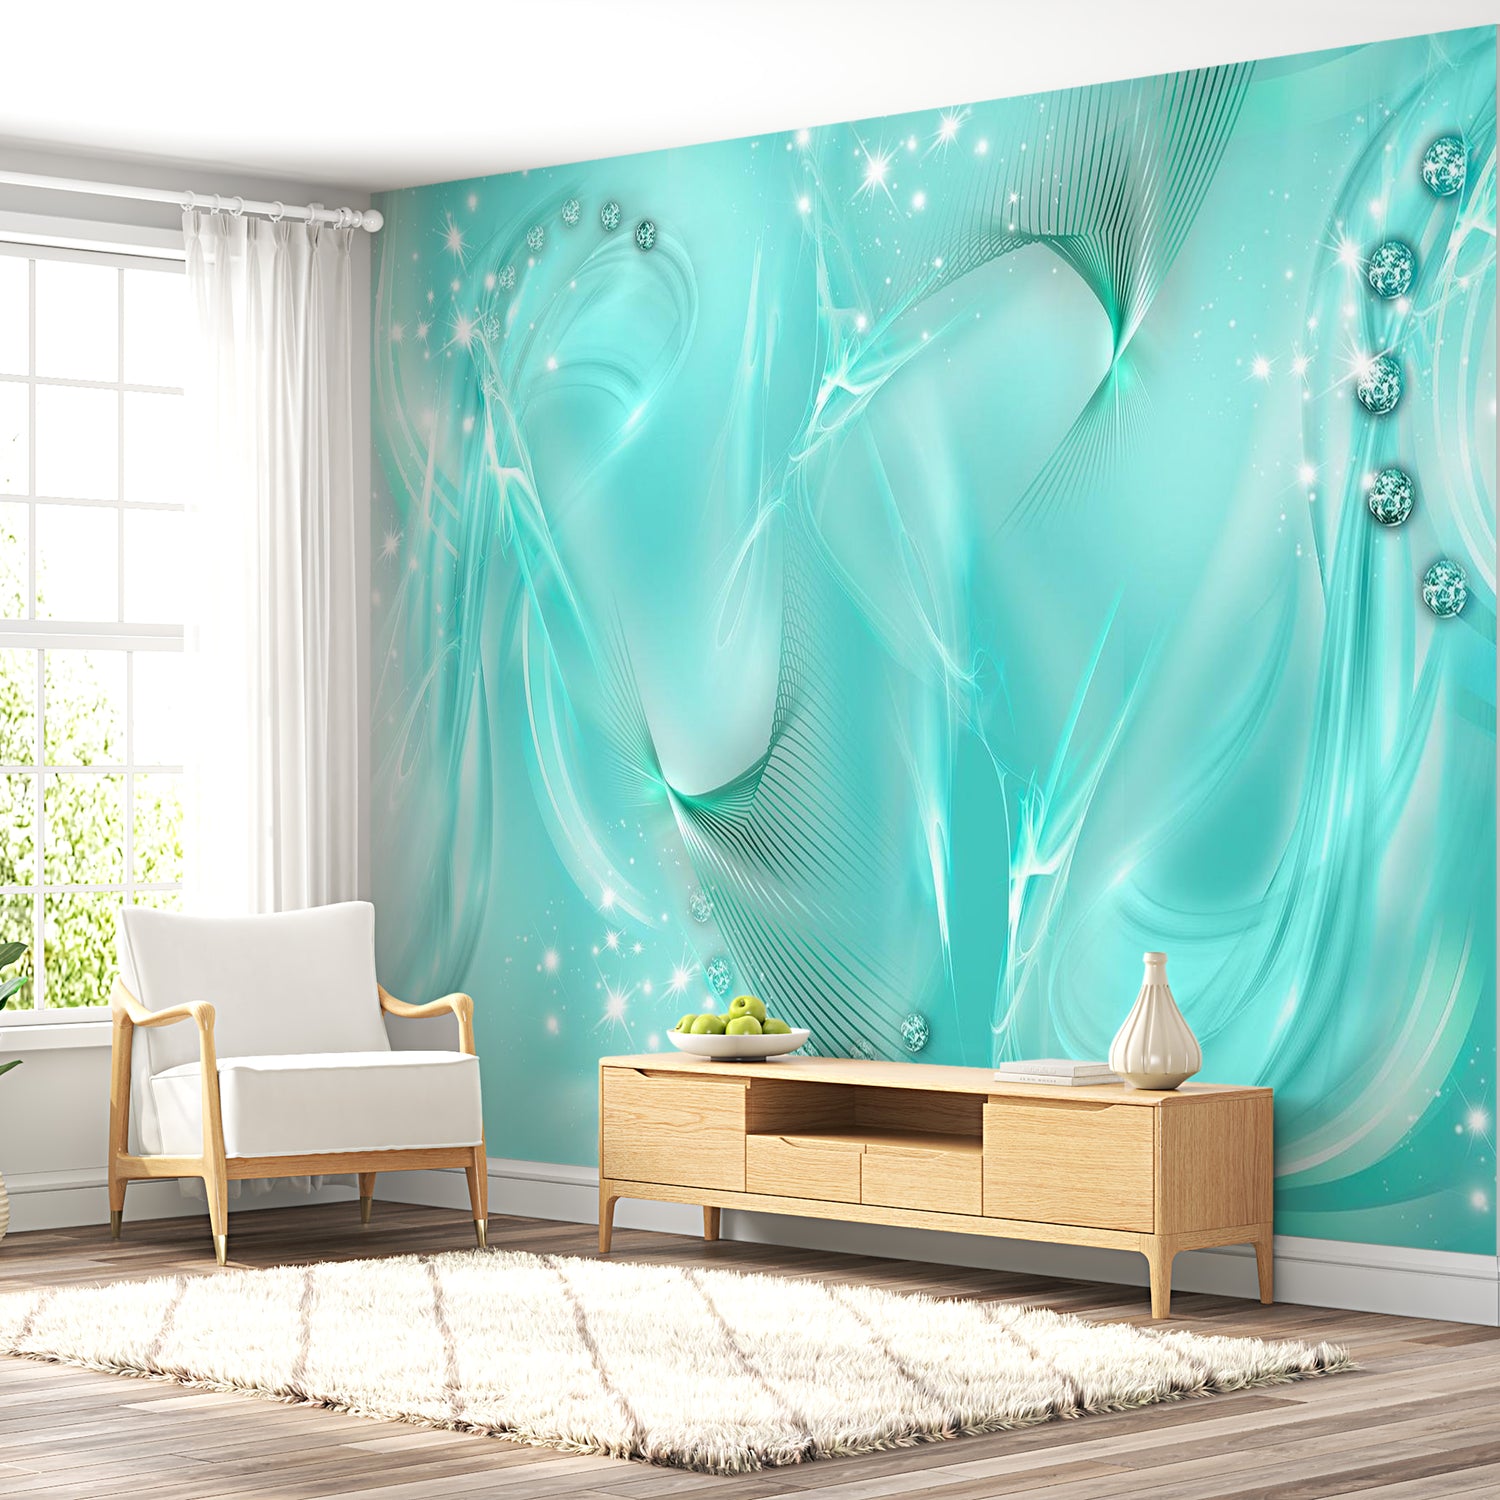 Peel & Stick Glam Wall Mural - Enchanted Turquoise - Removable Wall Decals